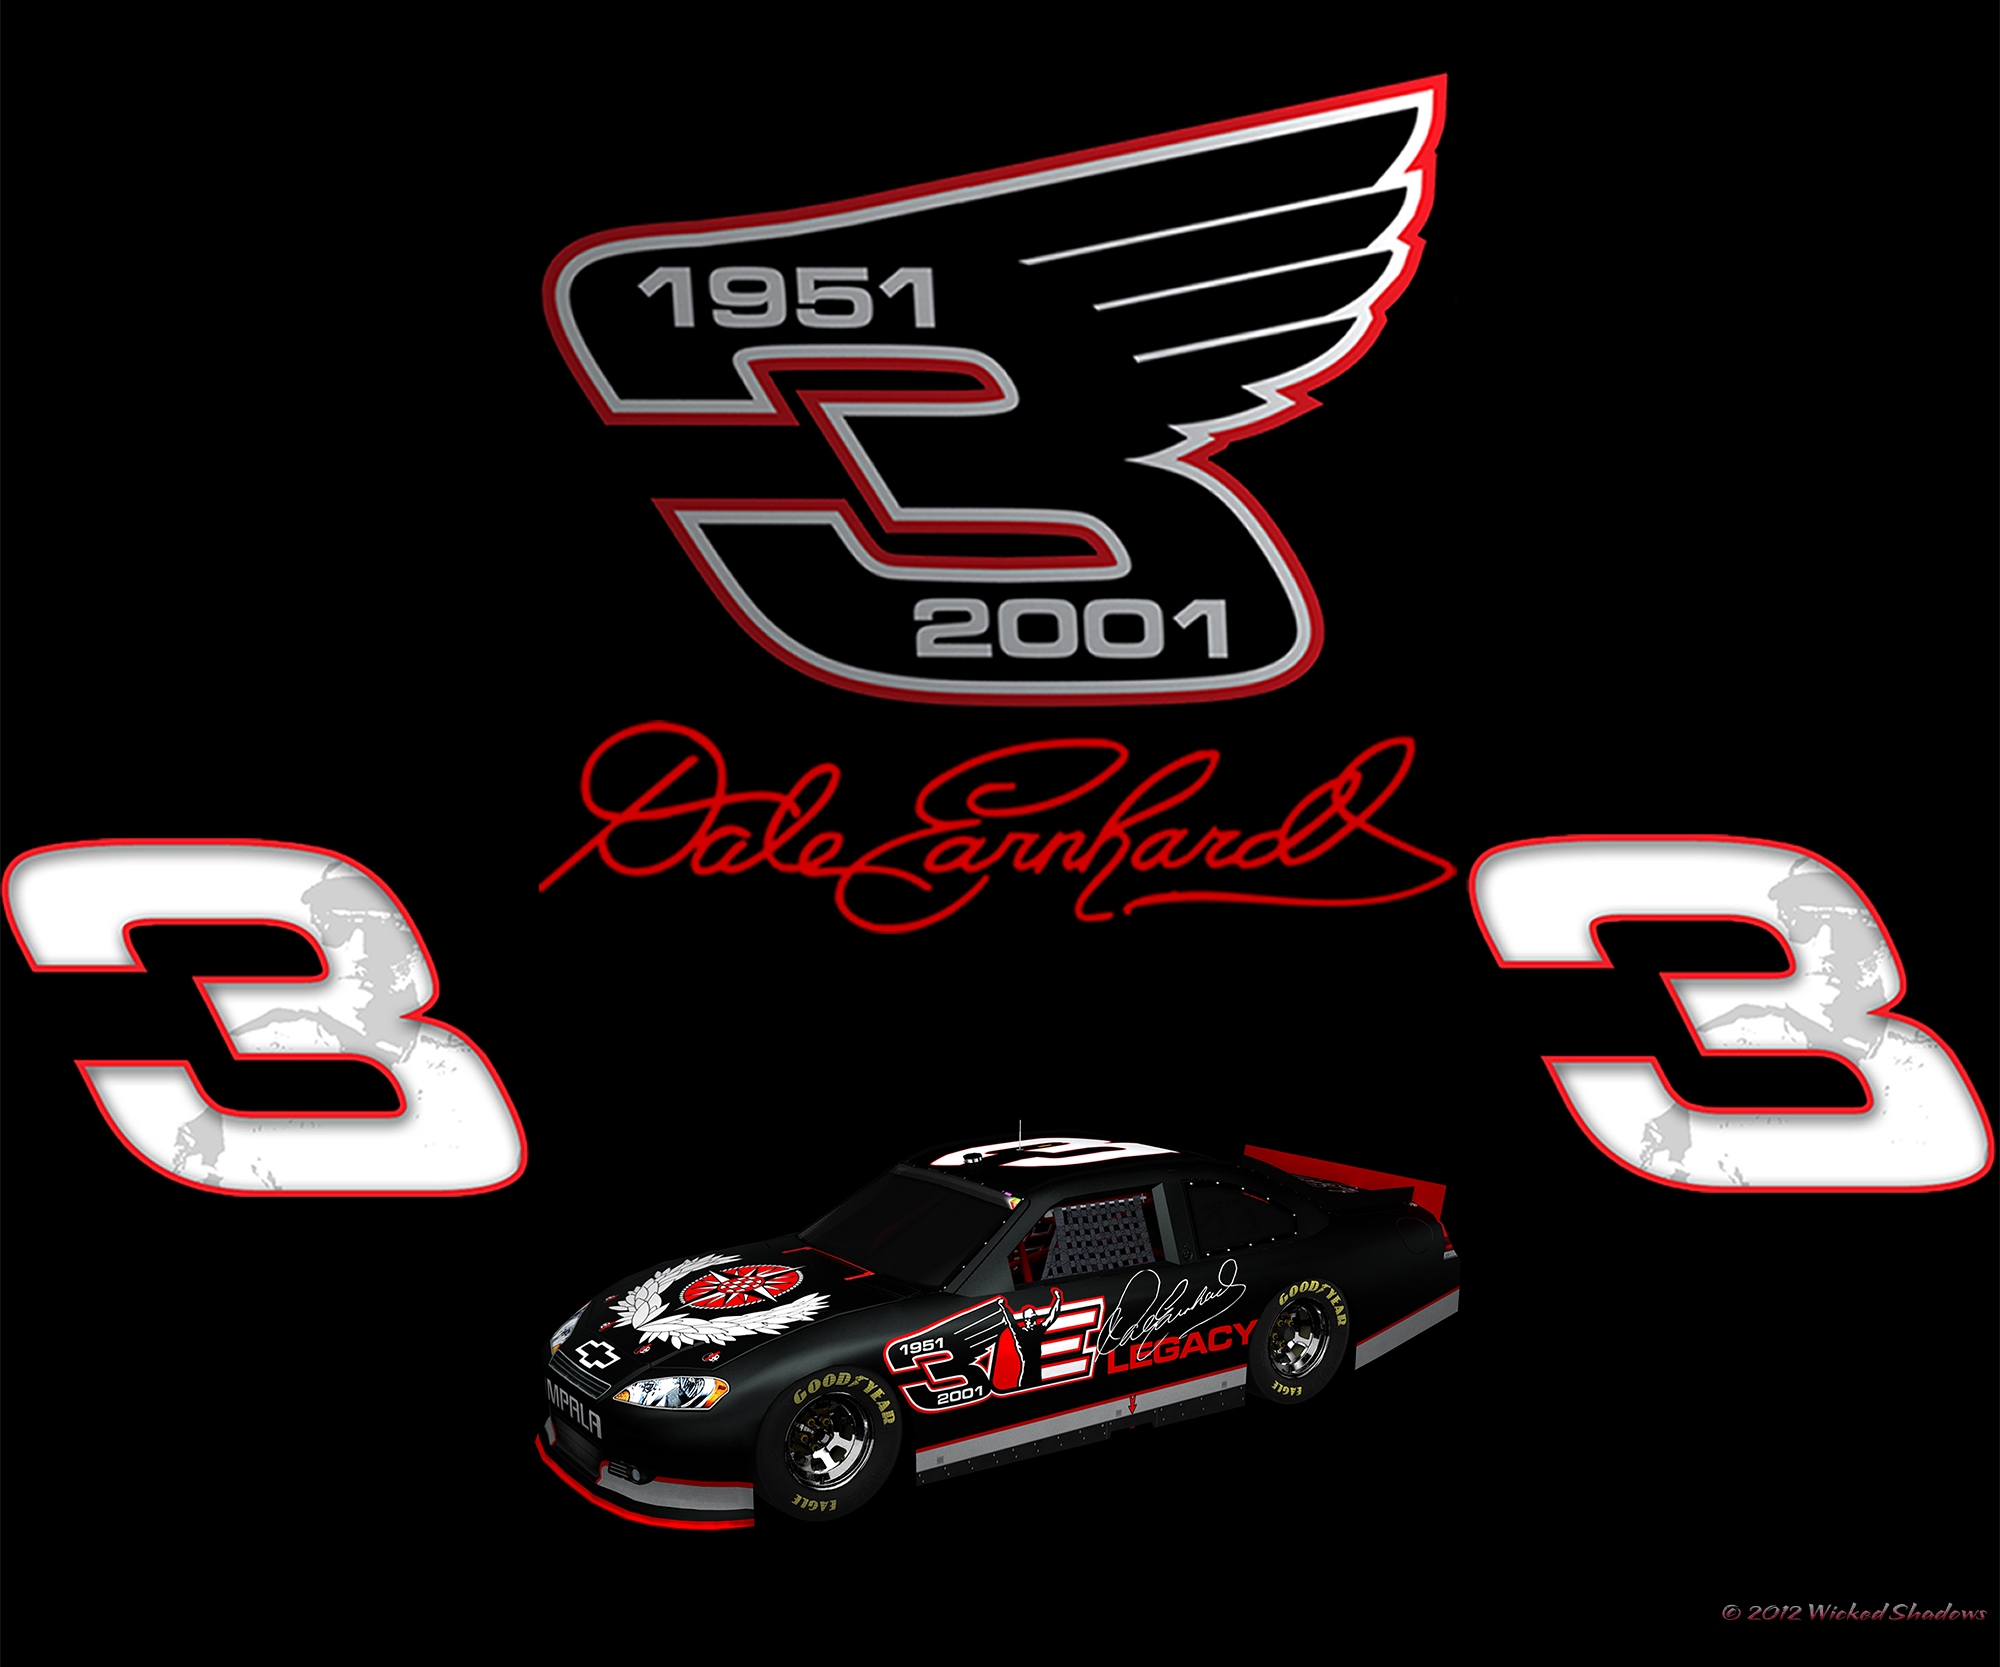 Dale Earnhardt Sr Blackout Tribute Wallpaper Is Another One Of My Full